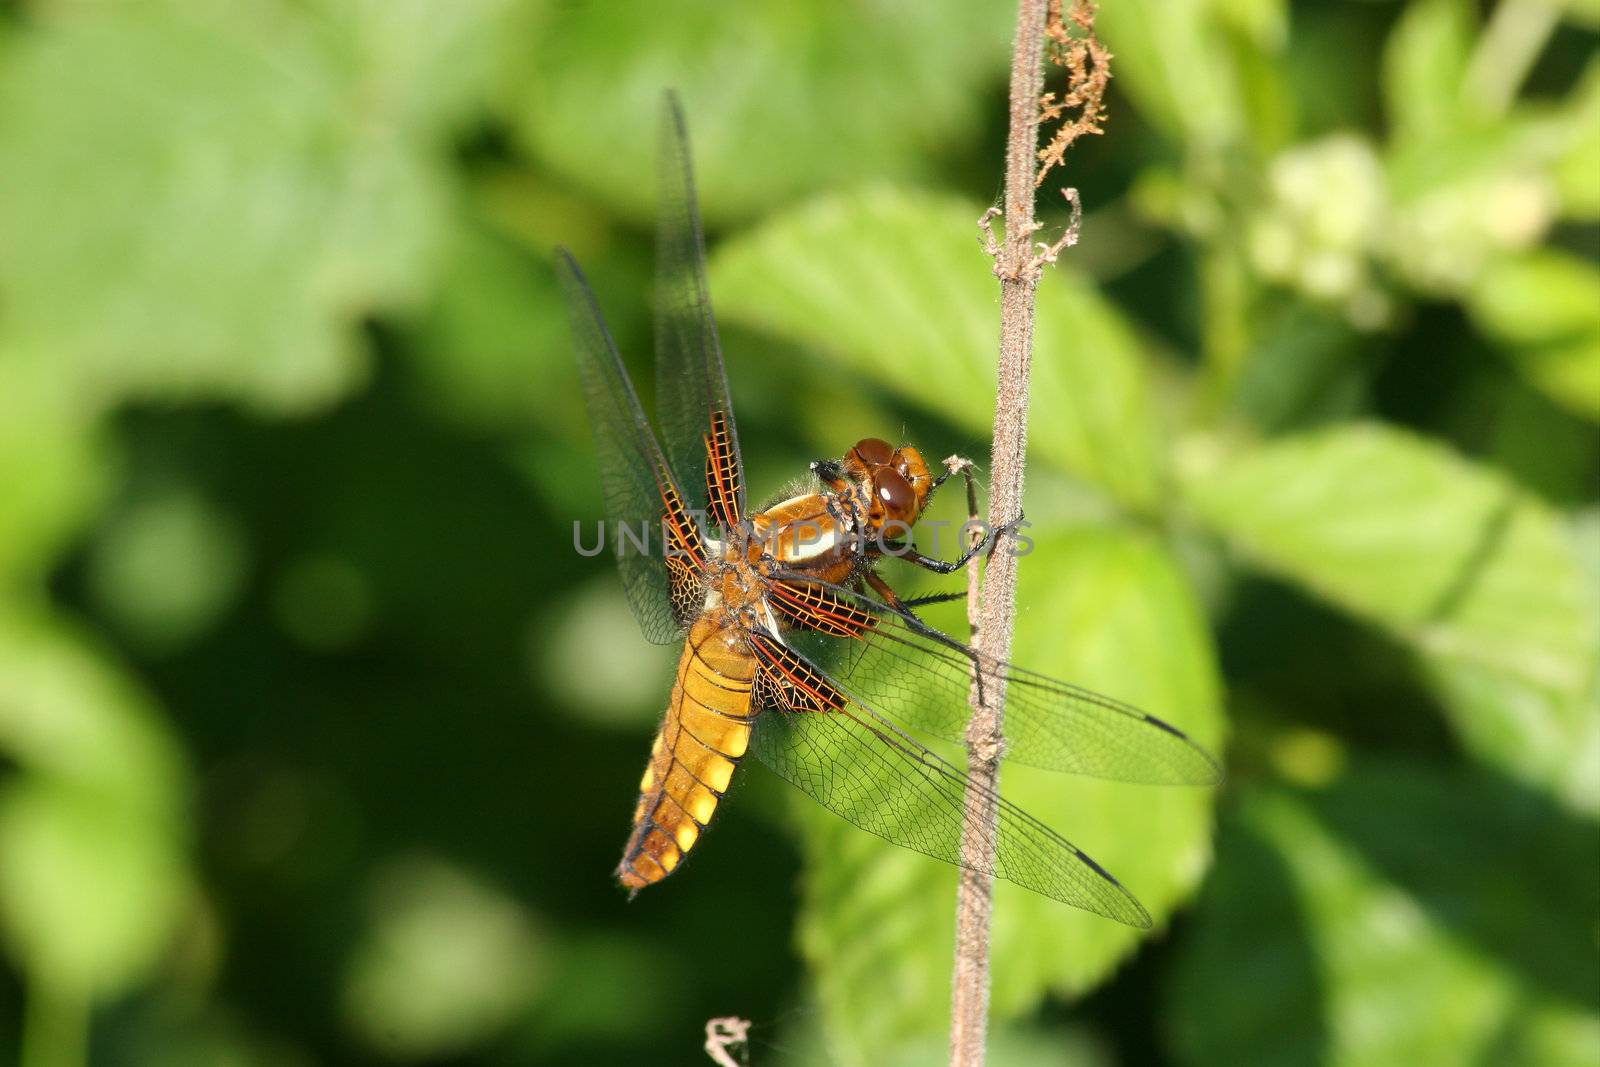 Broad-bodied Chaser (Libellula depressa) by tdietrich